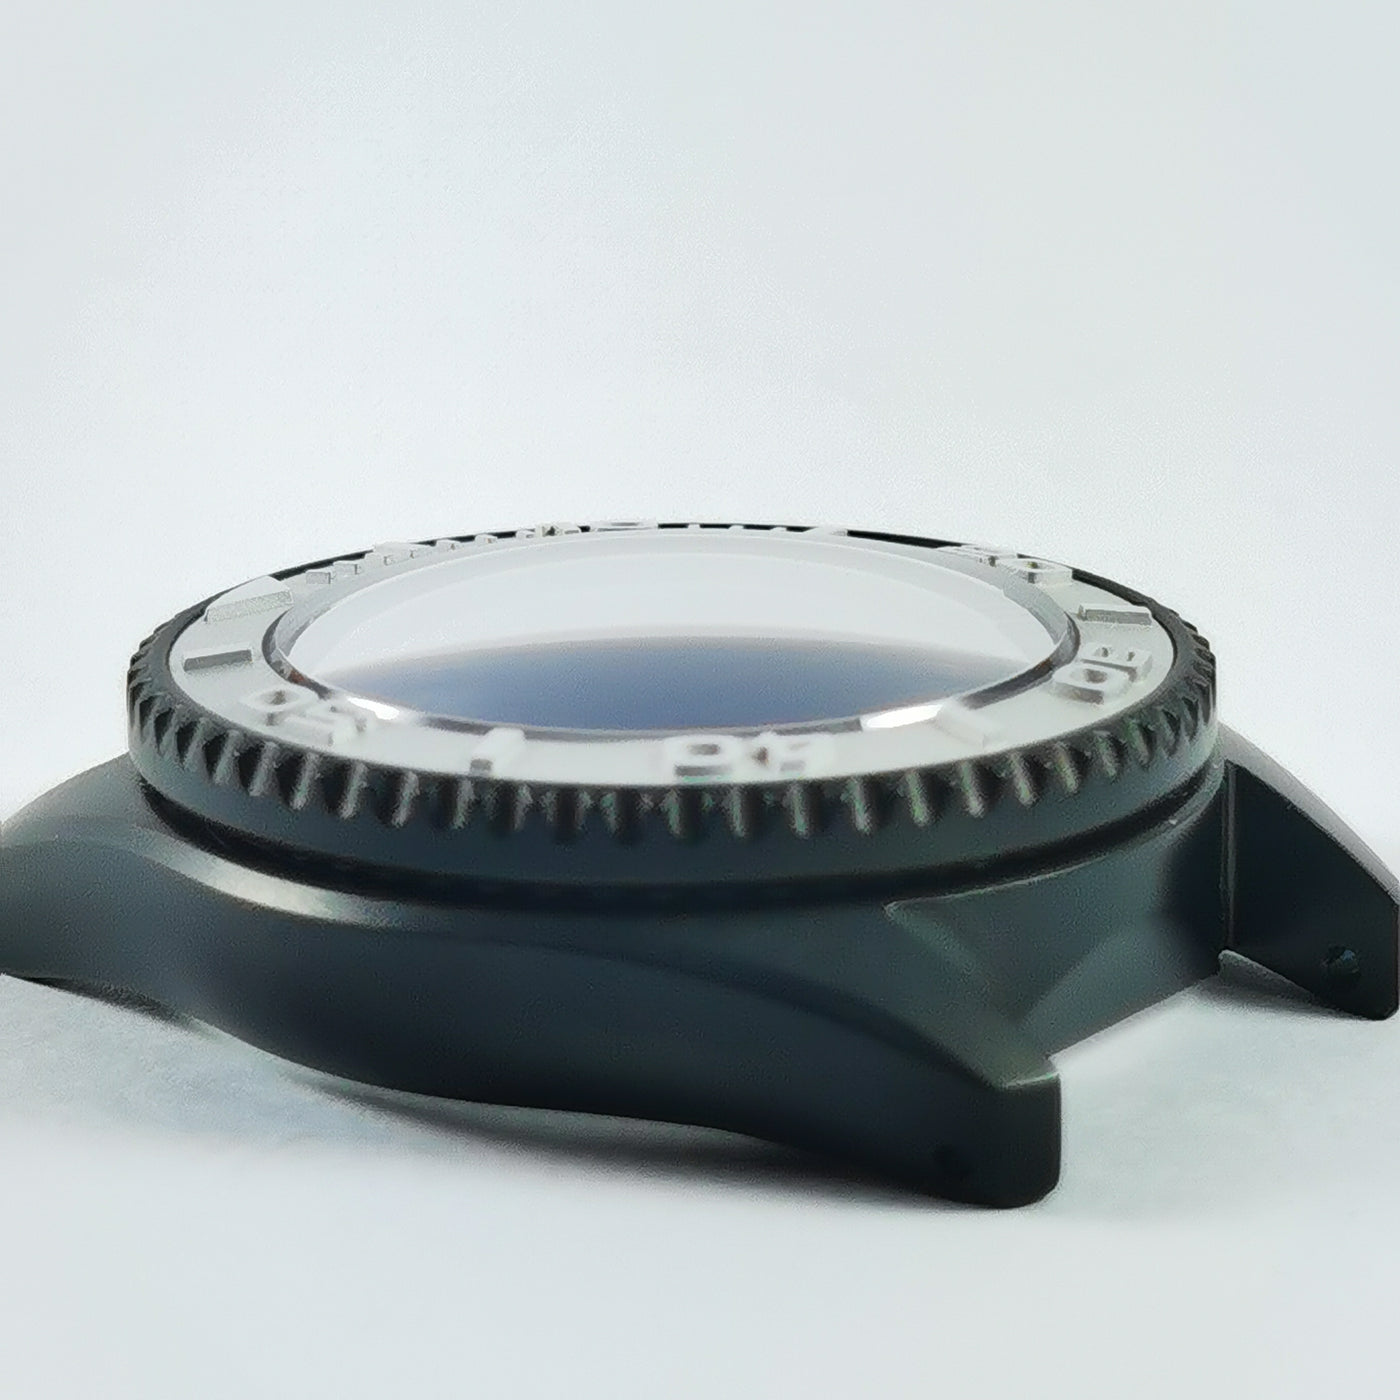 G0656 SKX013 Double Dome Sapphire Crystal - For Slope Insert